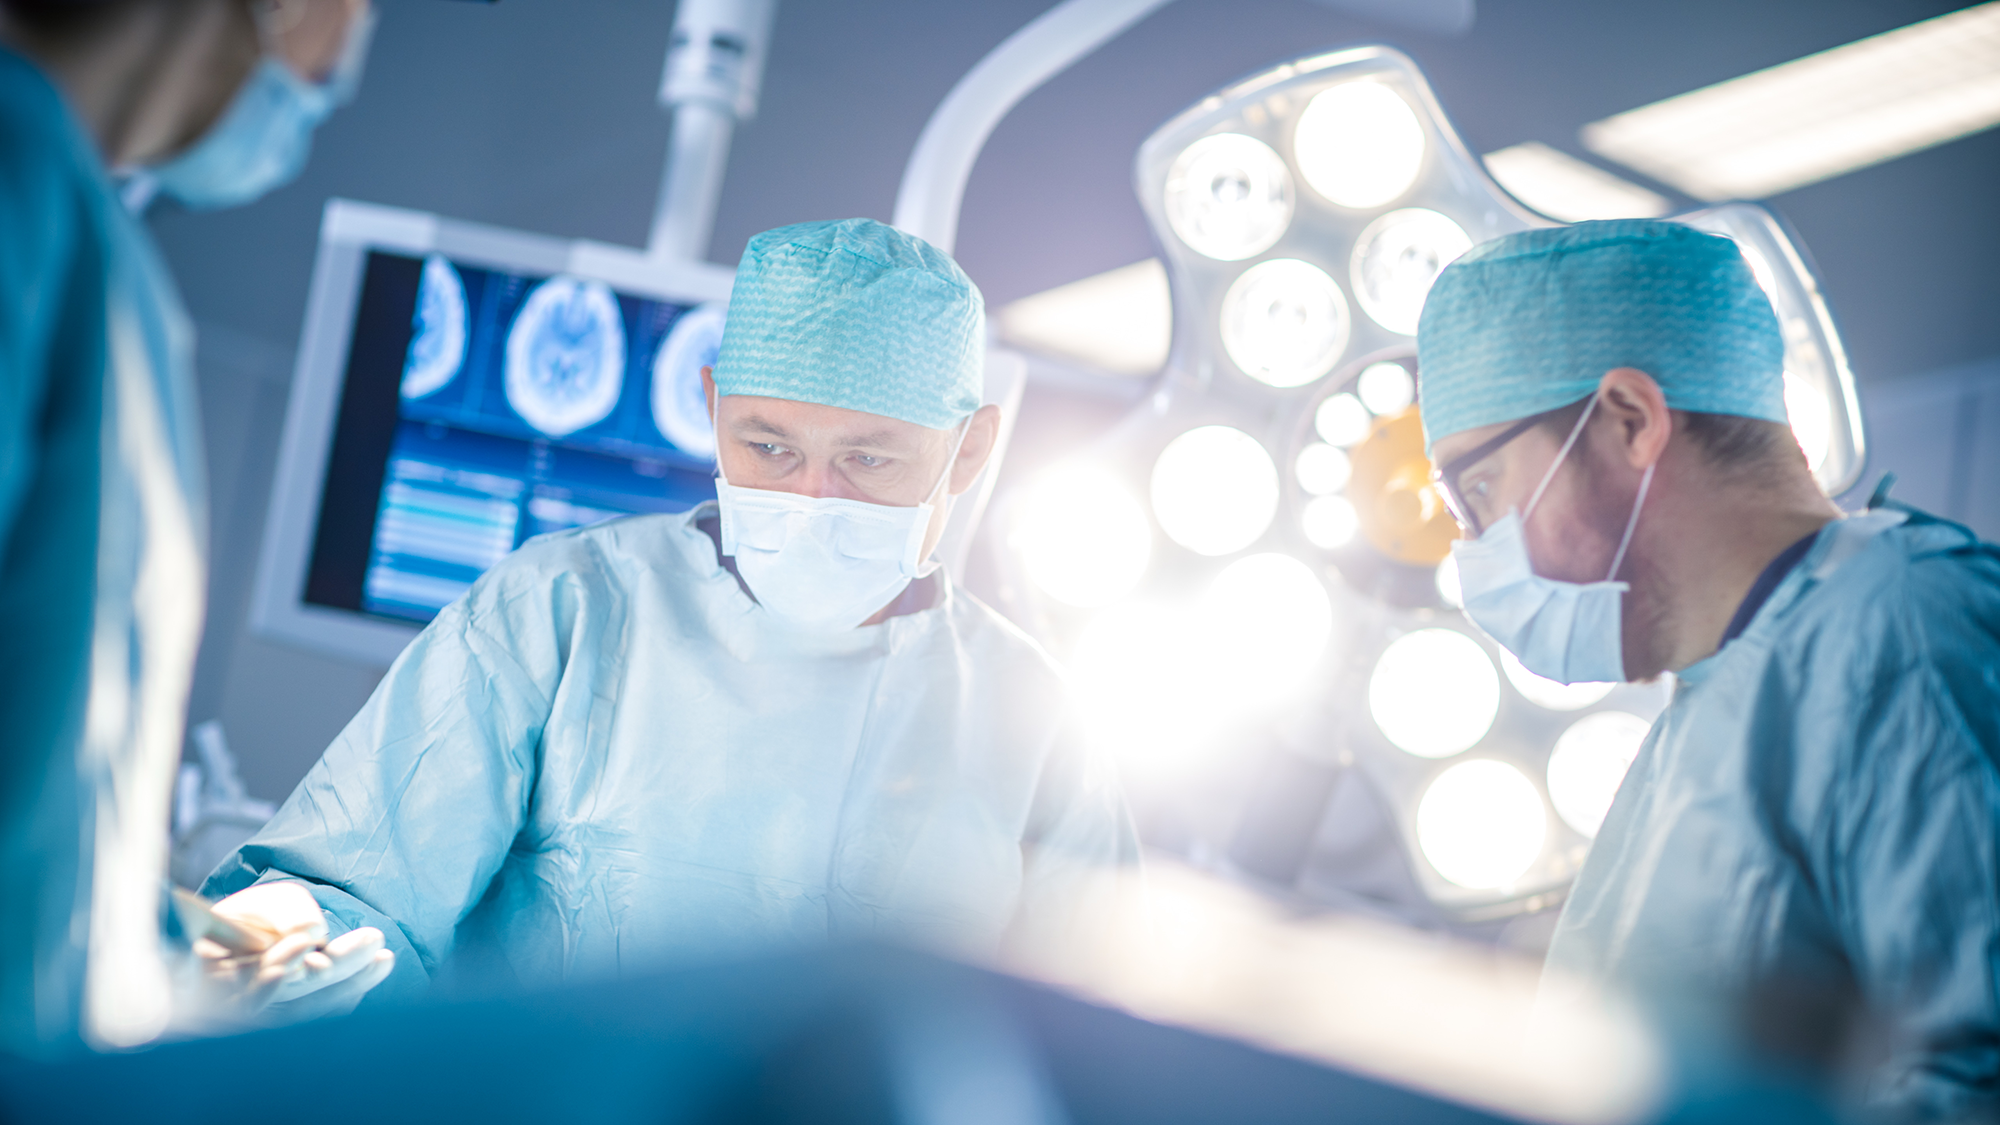 Surgeons in a surgery room. (Image: Shutterstock)